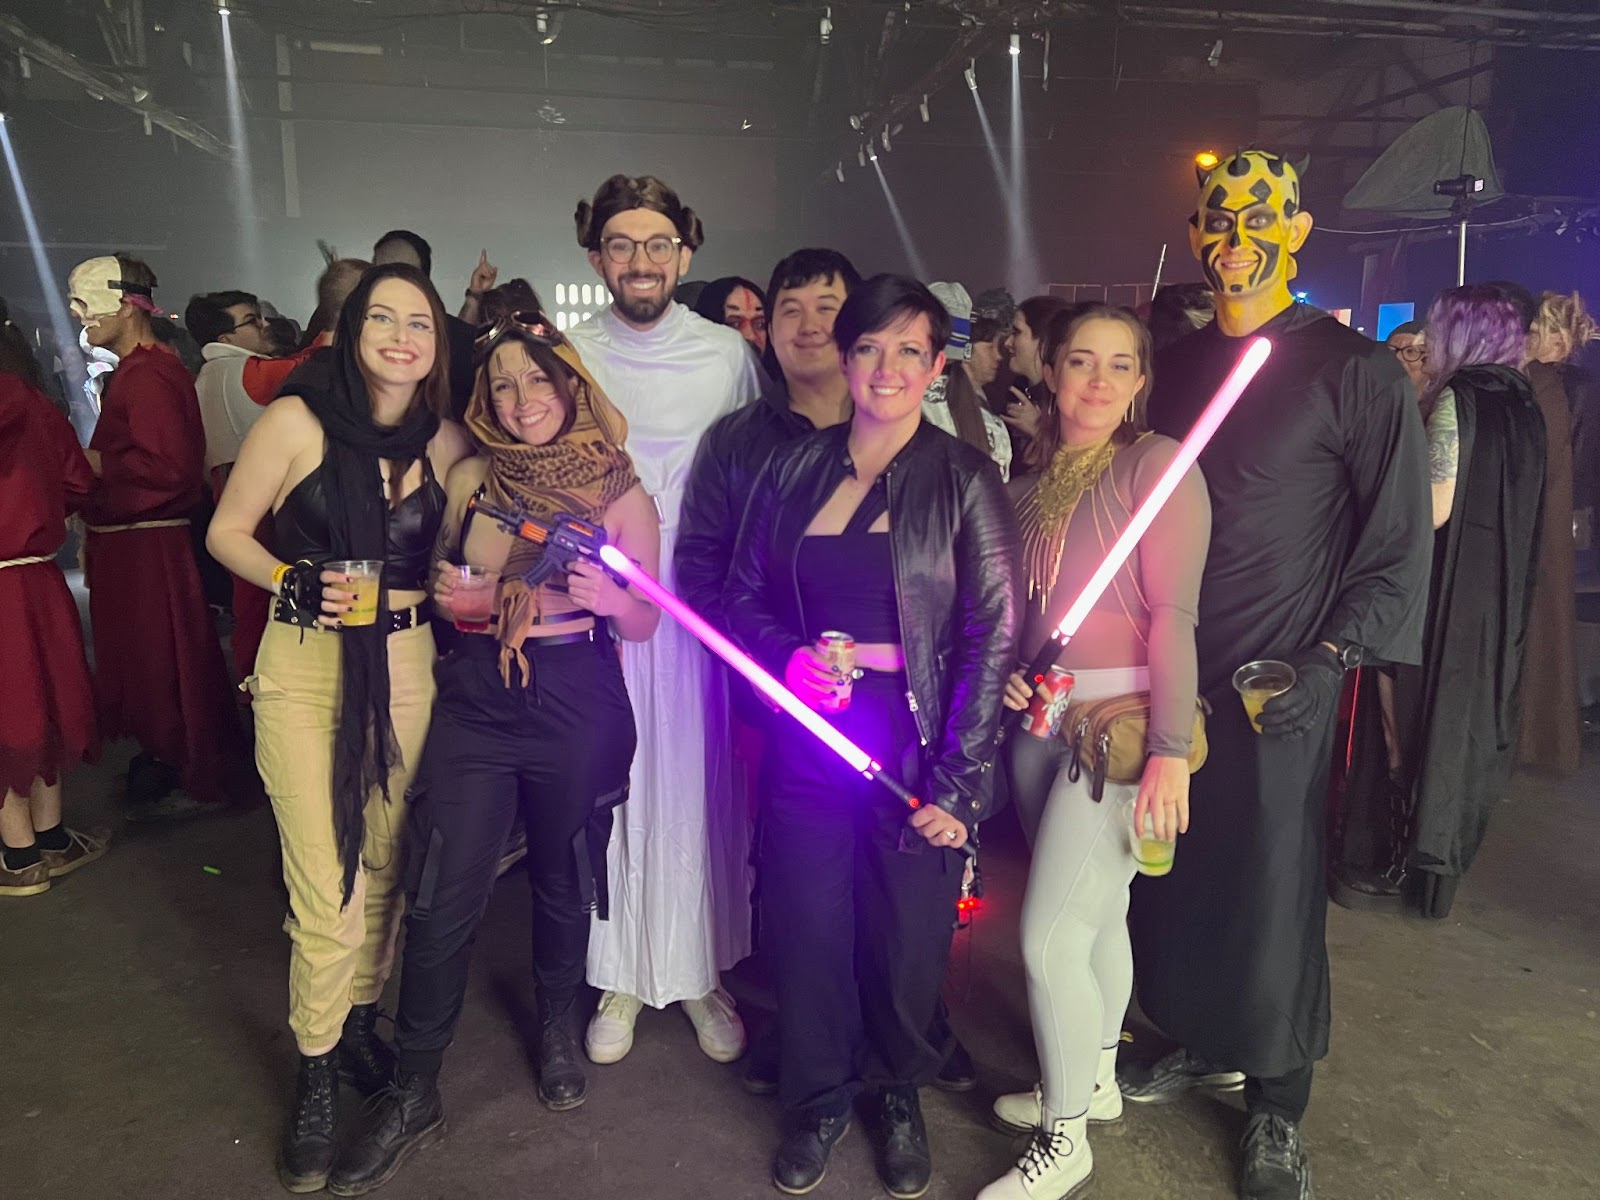 The annual Star Wars party in Detroit with my friends. 